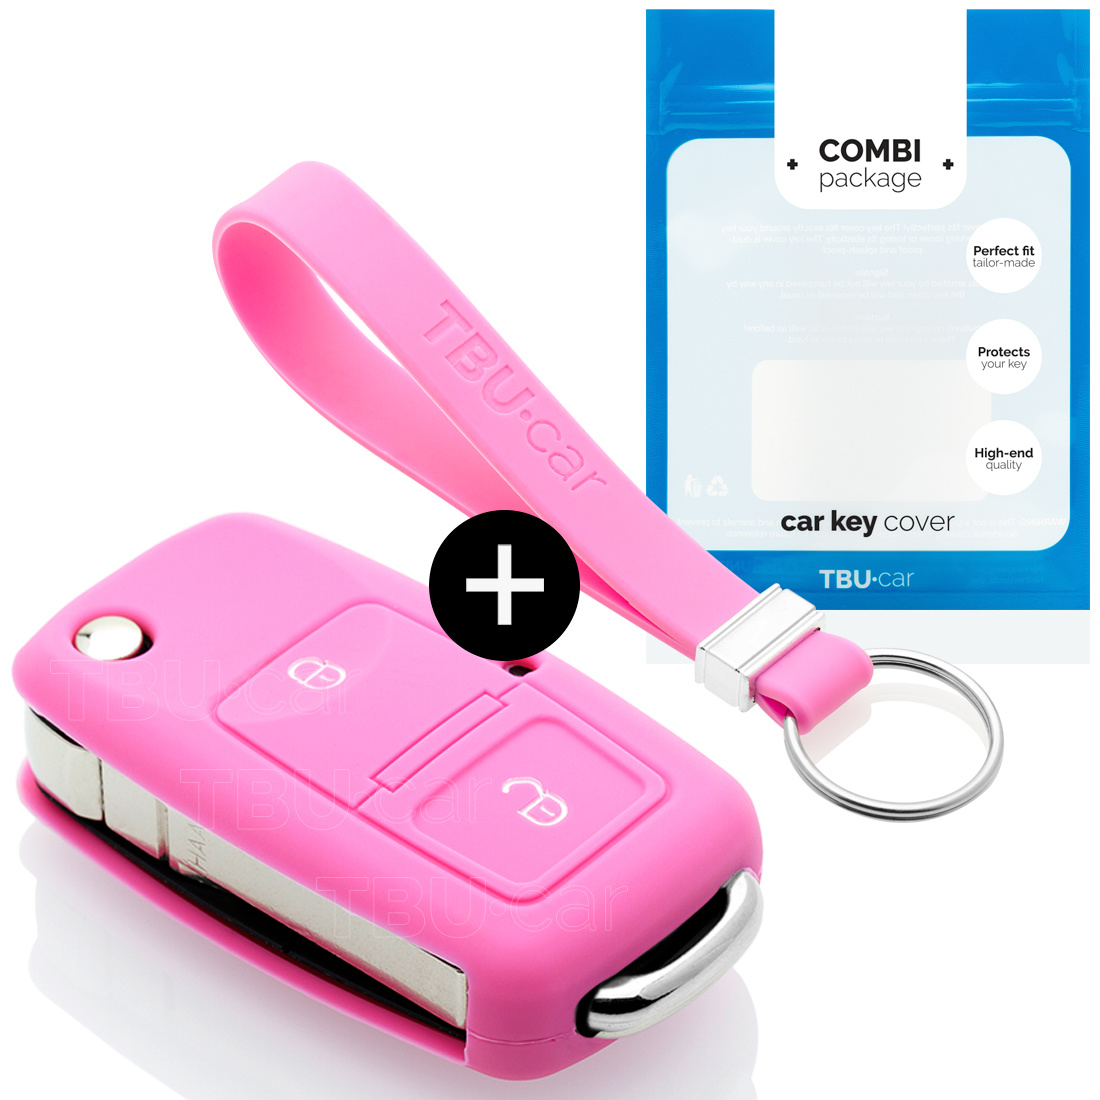 TBU car TBU car Car key cover compatible with Seat - Silicone Protective Remote Key Shell - FOB Case Cover - Pink